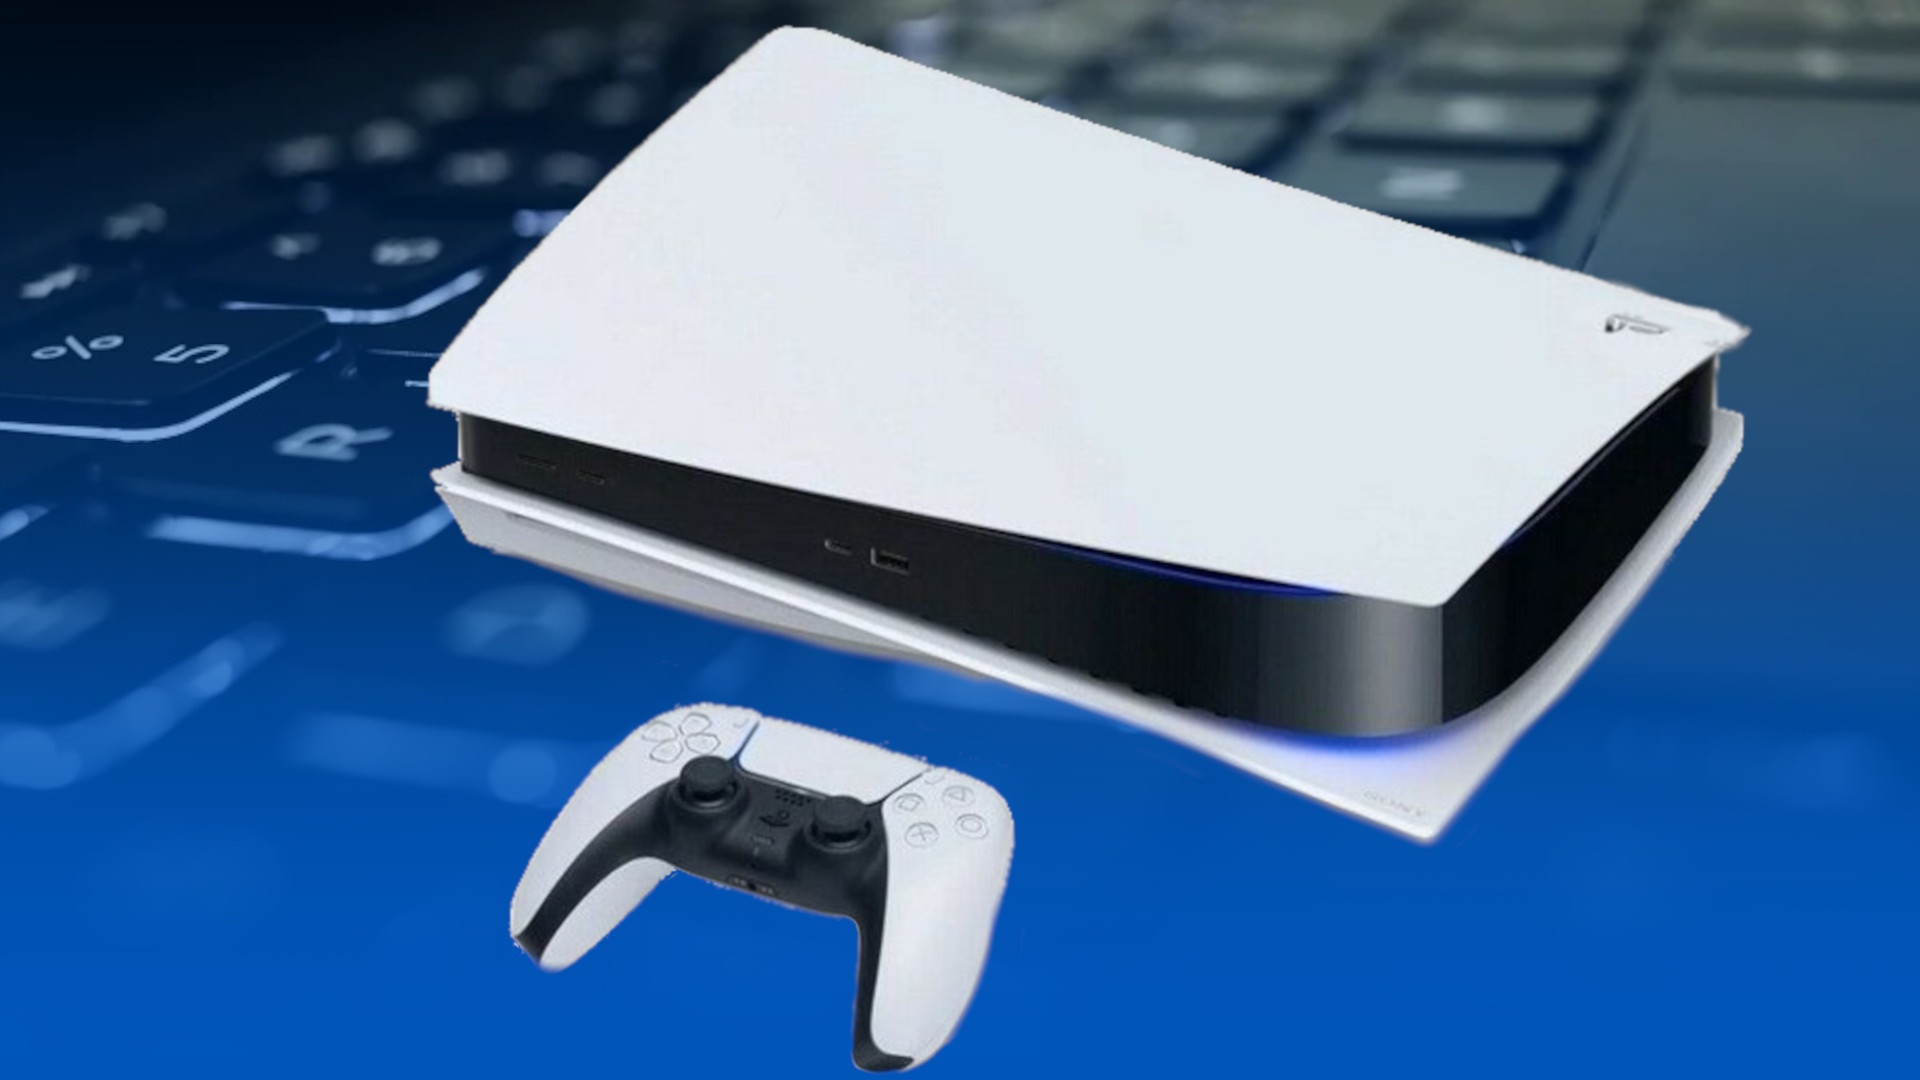 PS5 Pro is in development at Sony